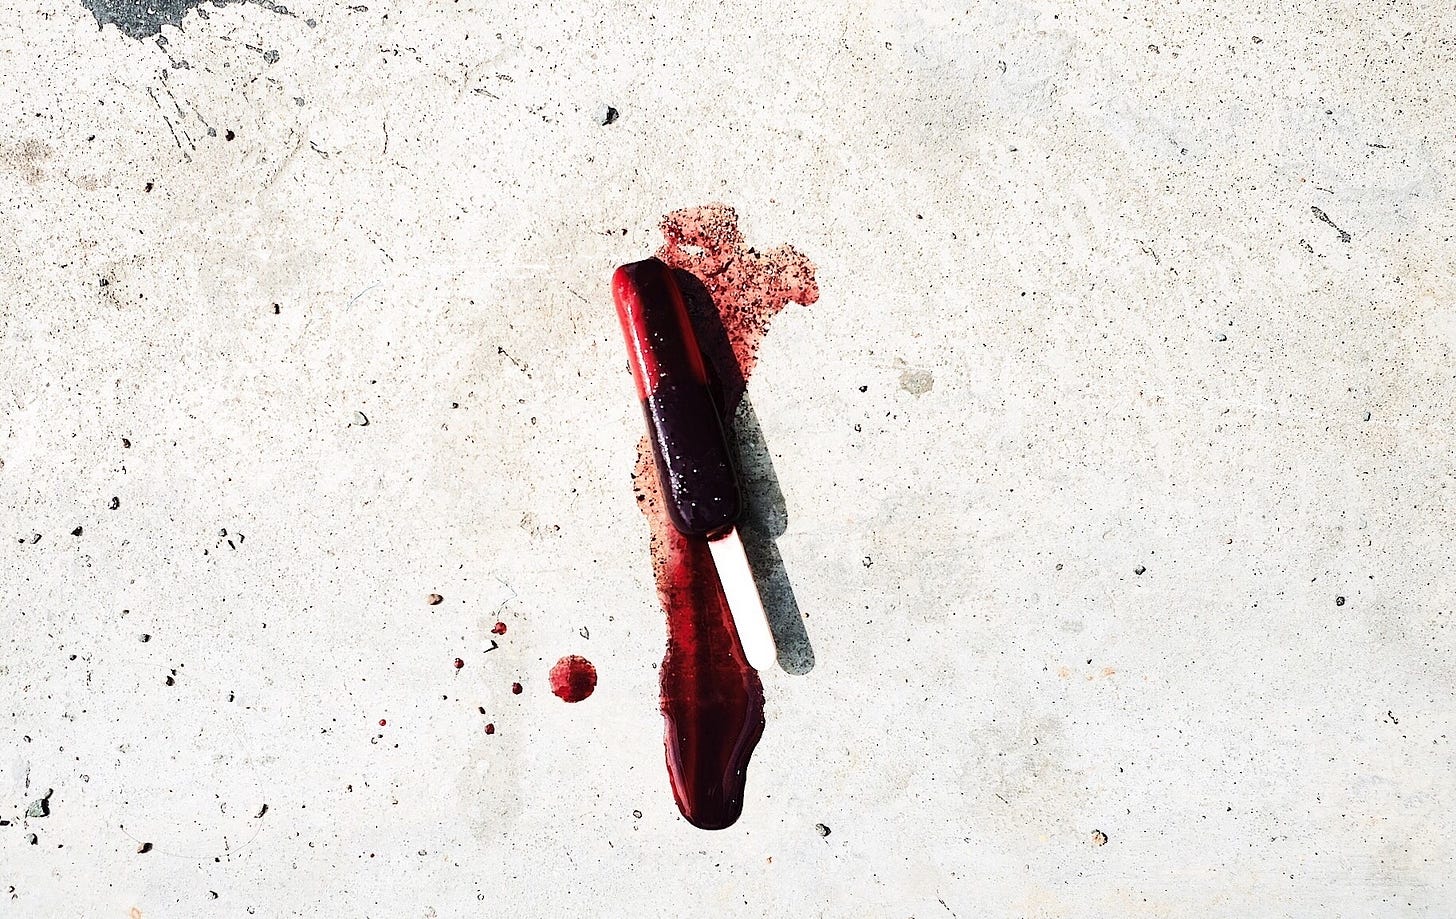 A melting black and bloodred popsicle .It more resembles a crime scene than a dessert